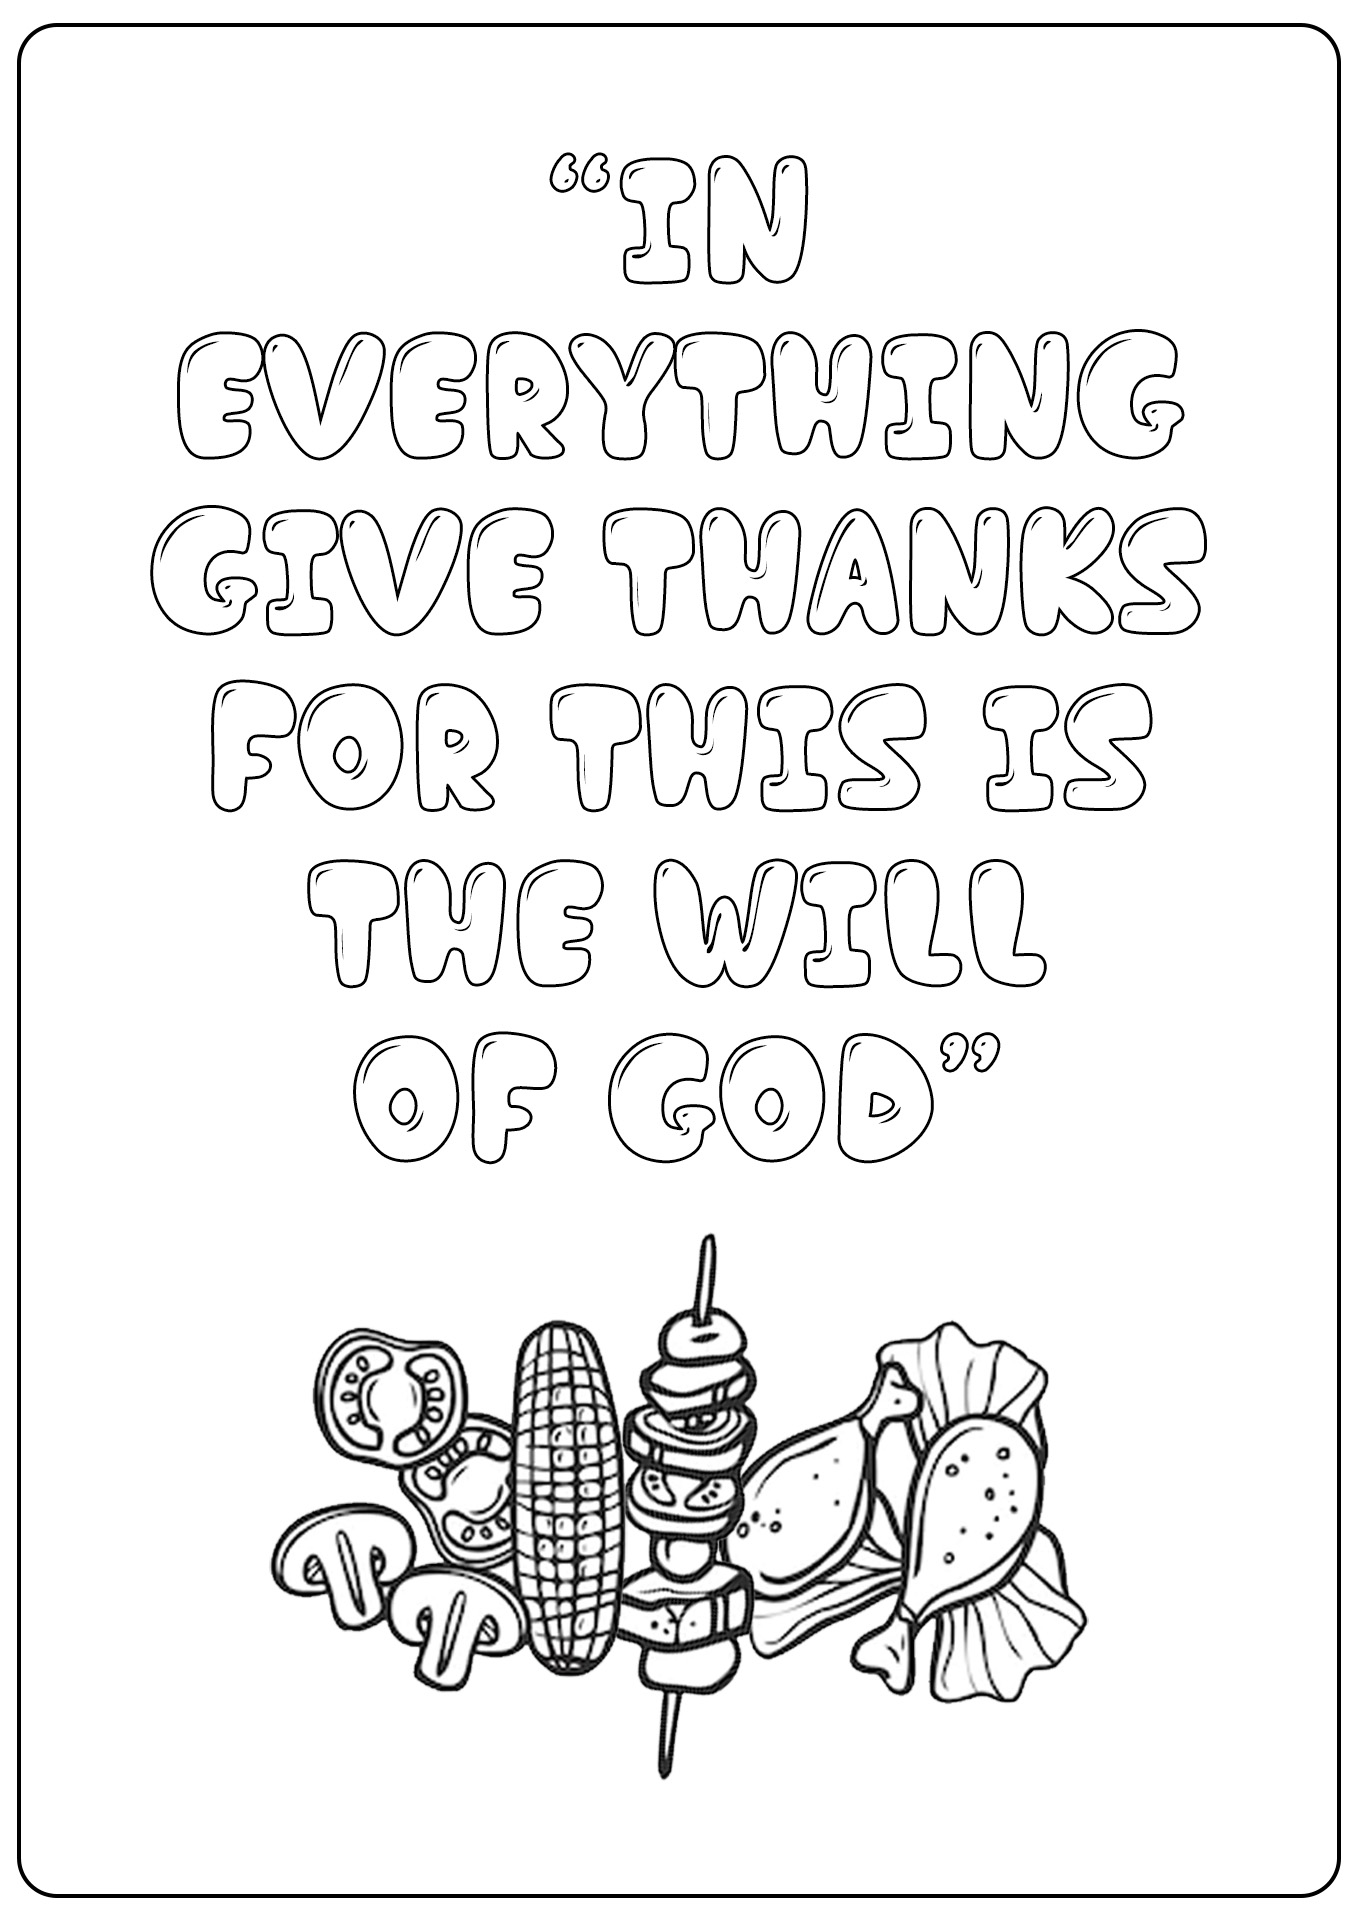 Catholic Thanksgiving Coloring Pages